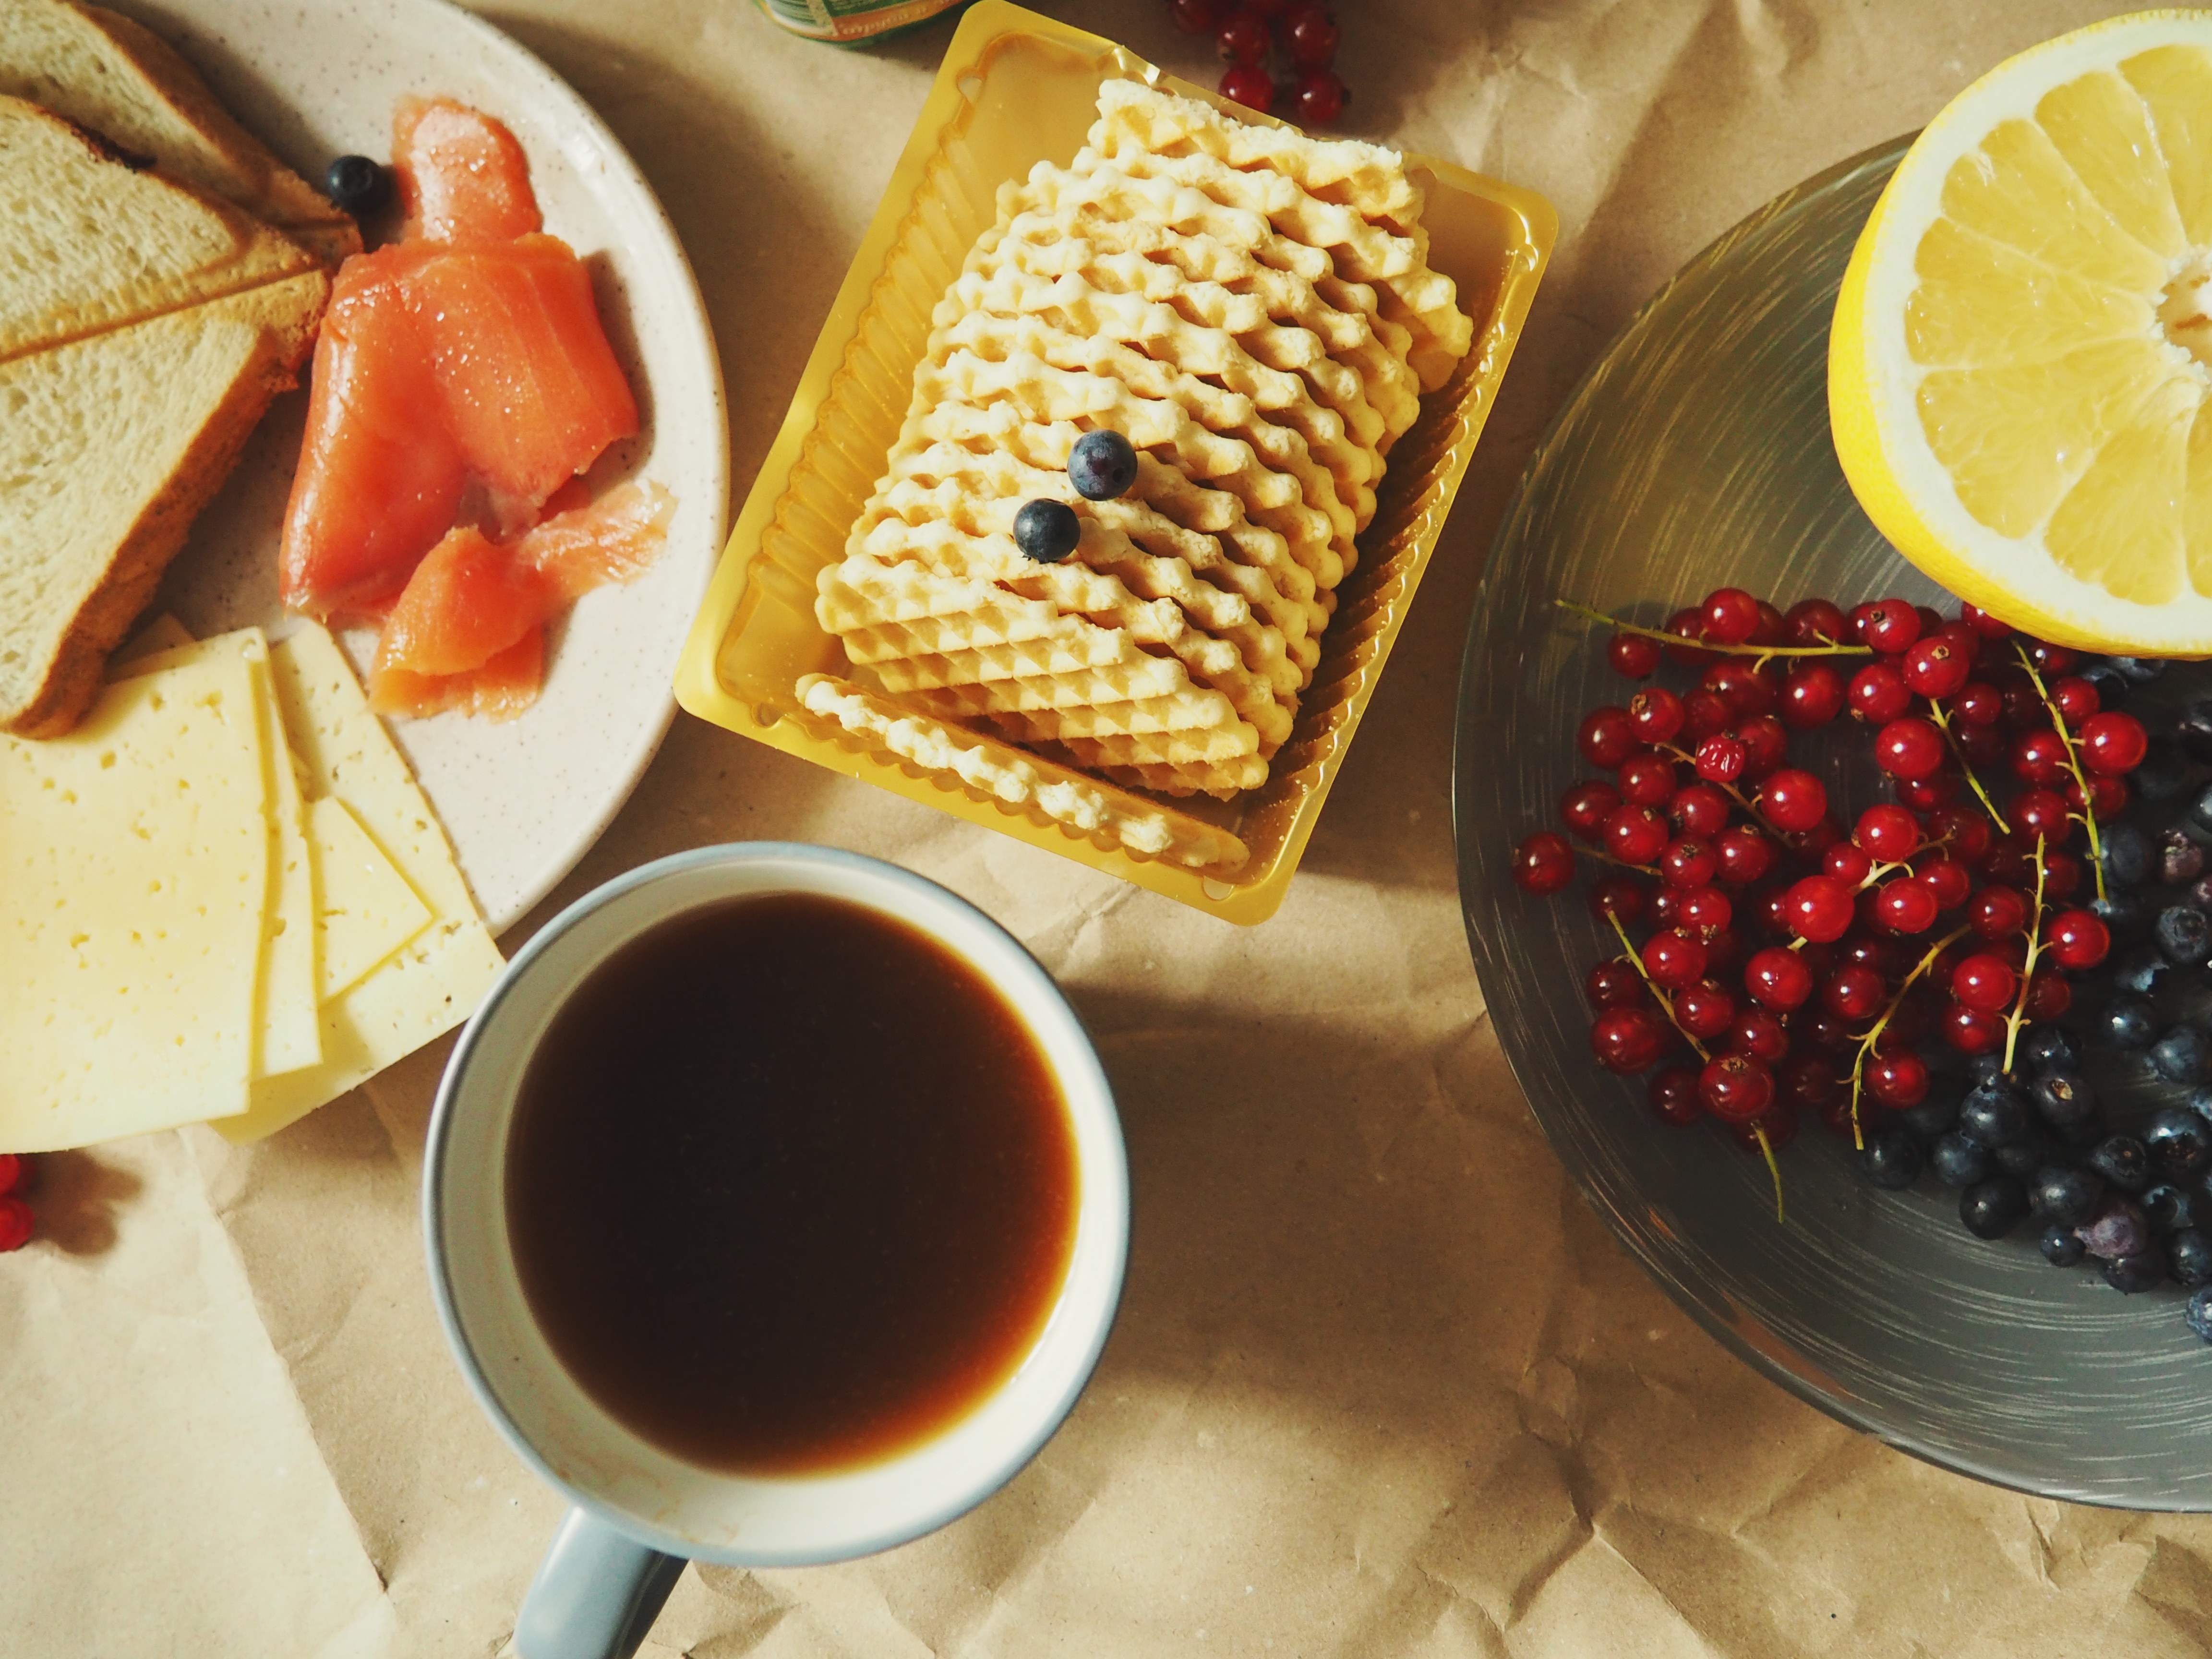 122606 download wallpaper food, cheese, waffles, currant, lemon, tea, fish screensavers and pictures for free